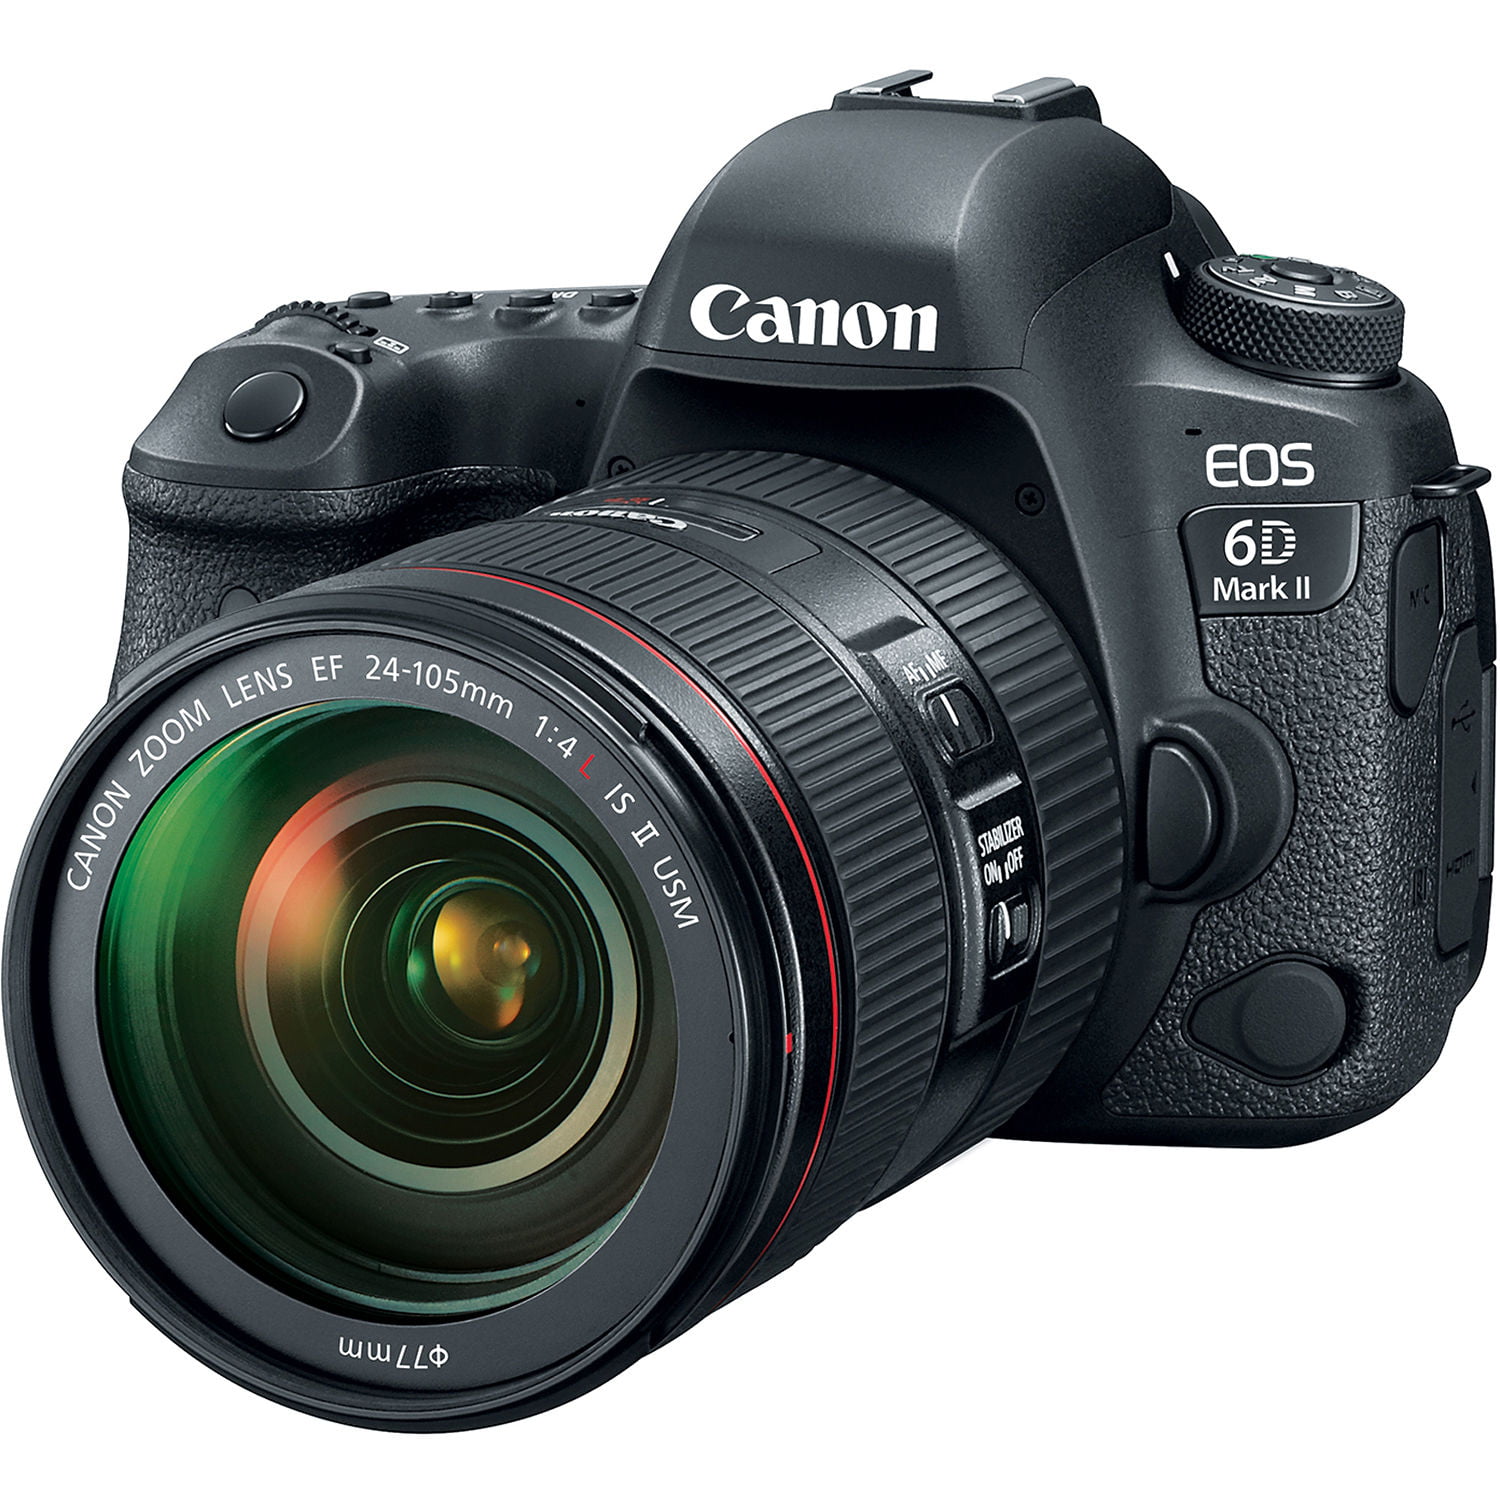 Canon EOS 6D Mark II DSLR Camera with 24-105mm f/4L II Lens - image 1 of 4